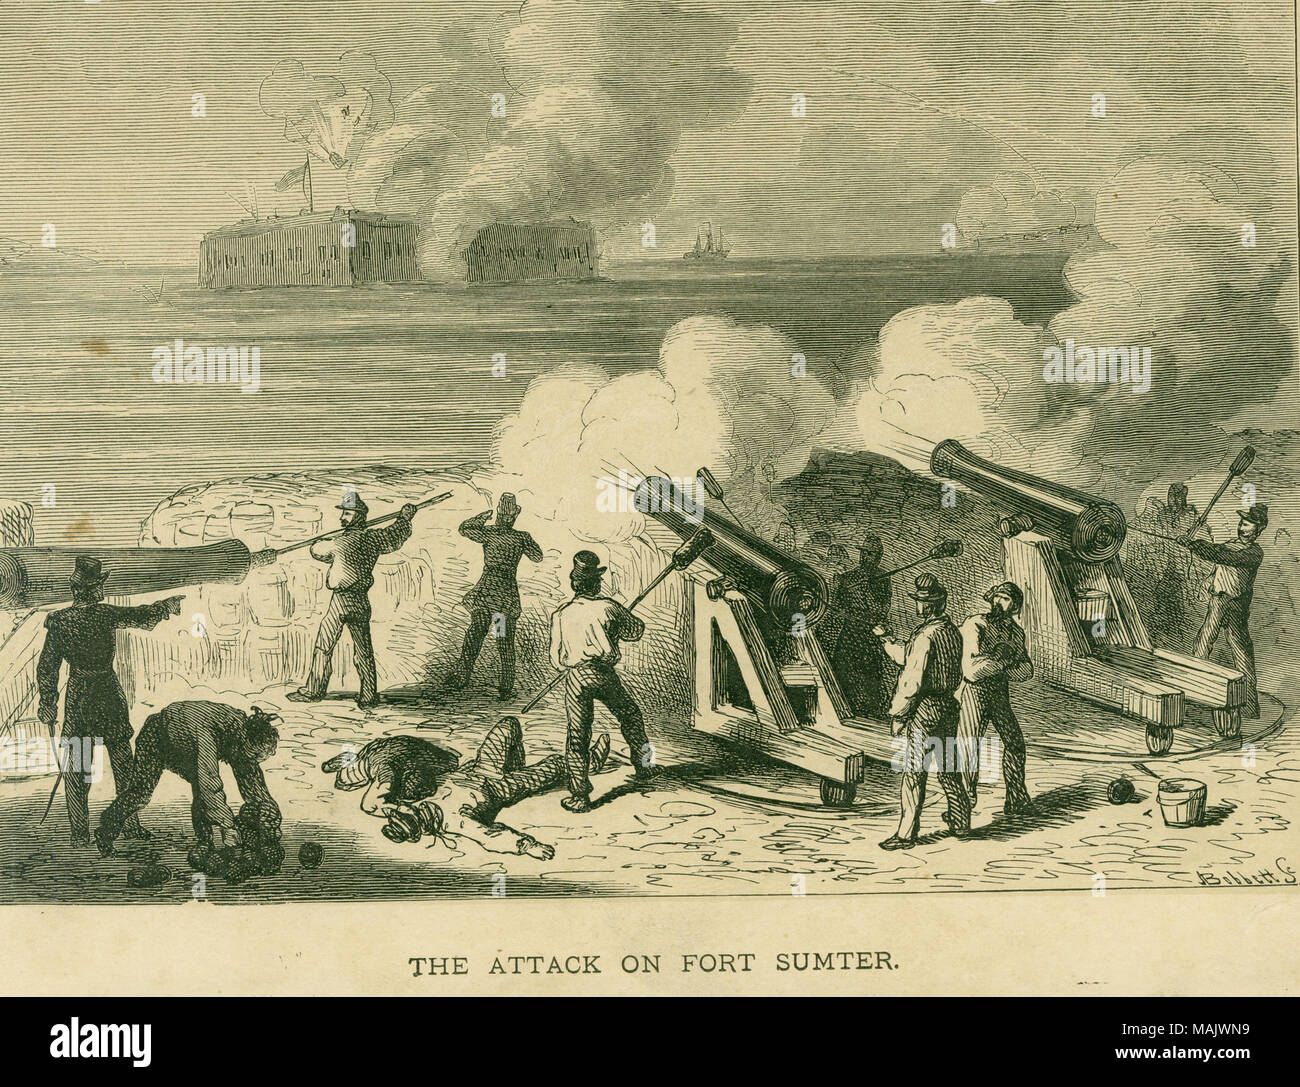 Print of artillerymen firing cannons in foreground at Fort Sumter in the background. 'THE ATTACK ON FORT SUMTER.' (printed below image). Title: 'The Attack on Fort Sumter.'  . between 1861 and 1865. Bobbett Stock Photo